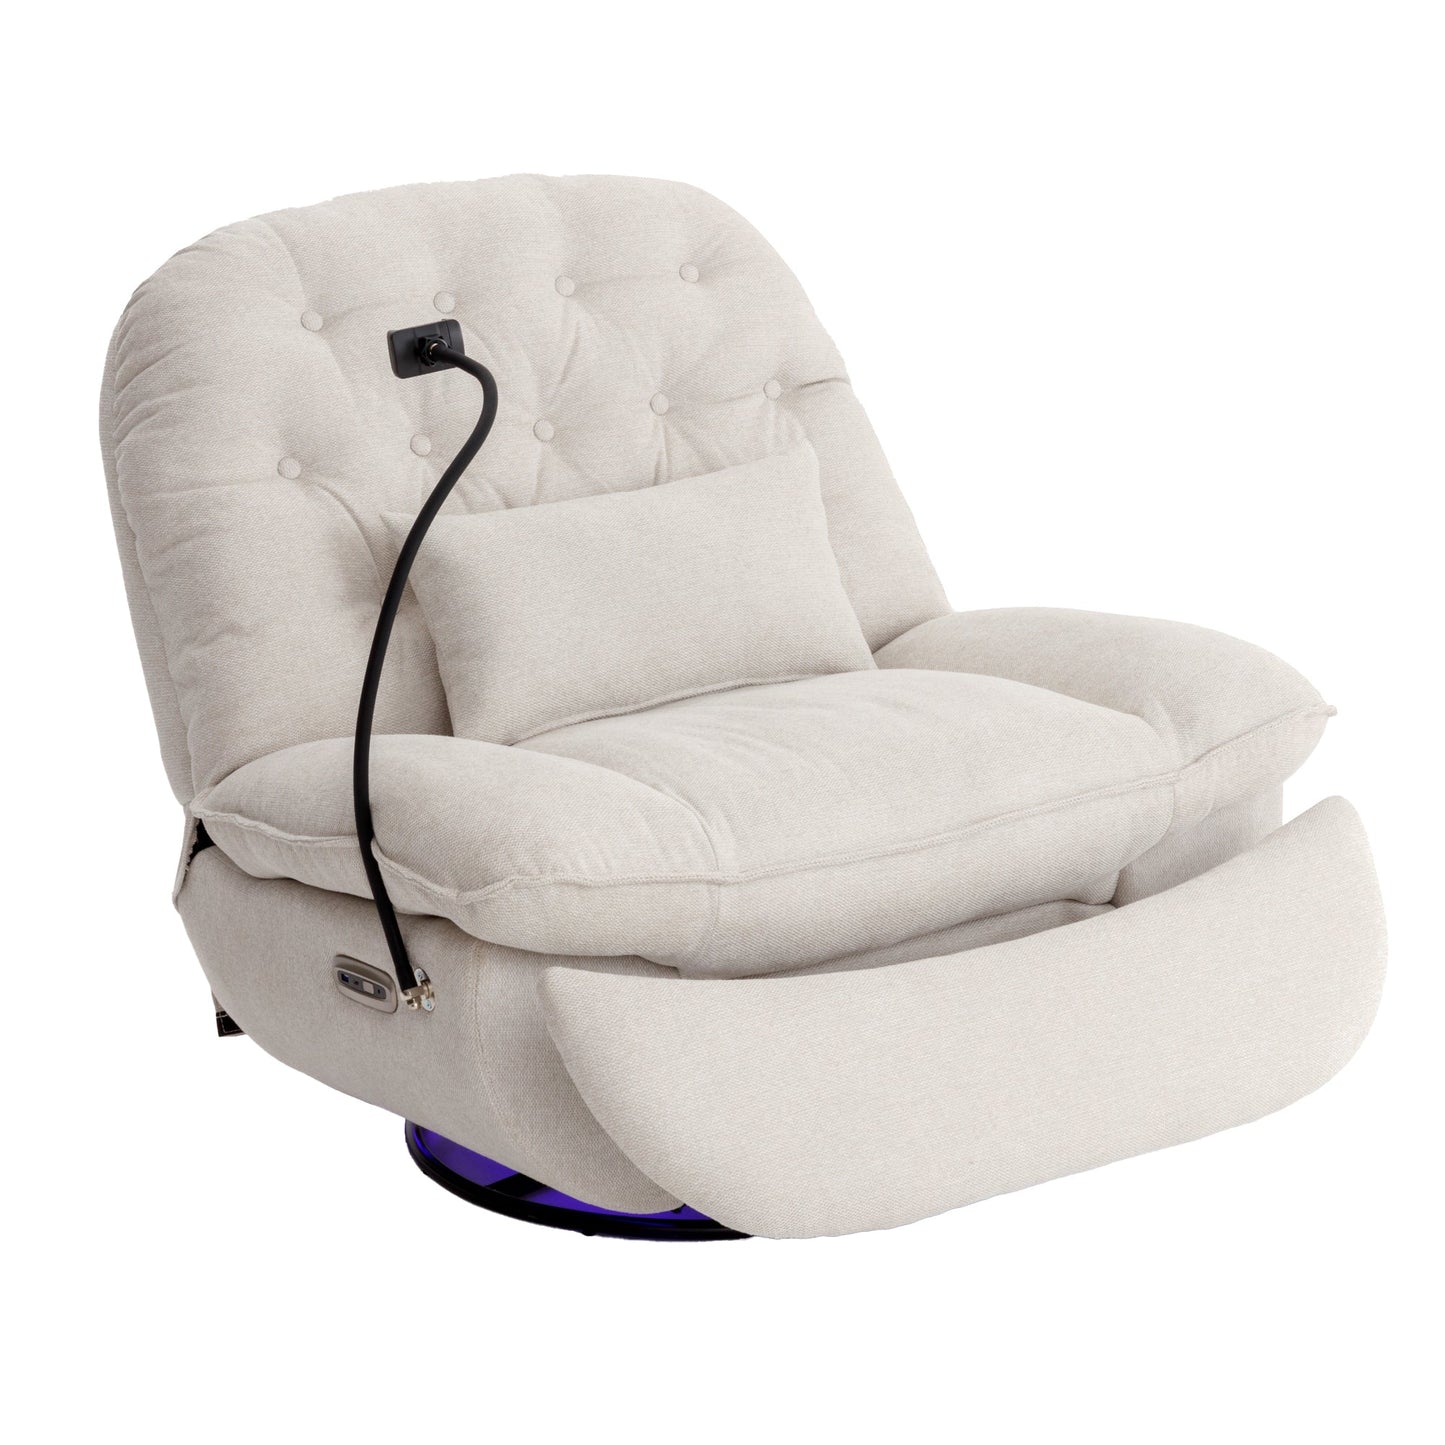 270 Degree Swivel Power Recliner with Voice Control, Bluetooth Music Player,USB Ports, Atmosphere Lamp, Hidden Arm Storage and Mobile Phone Holder for Living Room, Bedroom, Apartment, Beige